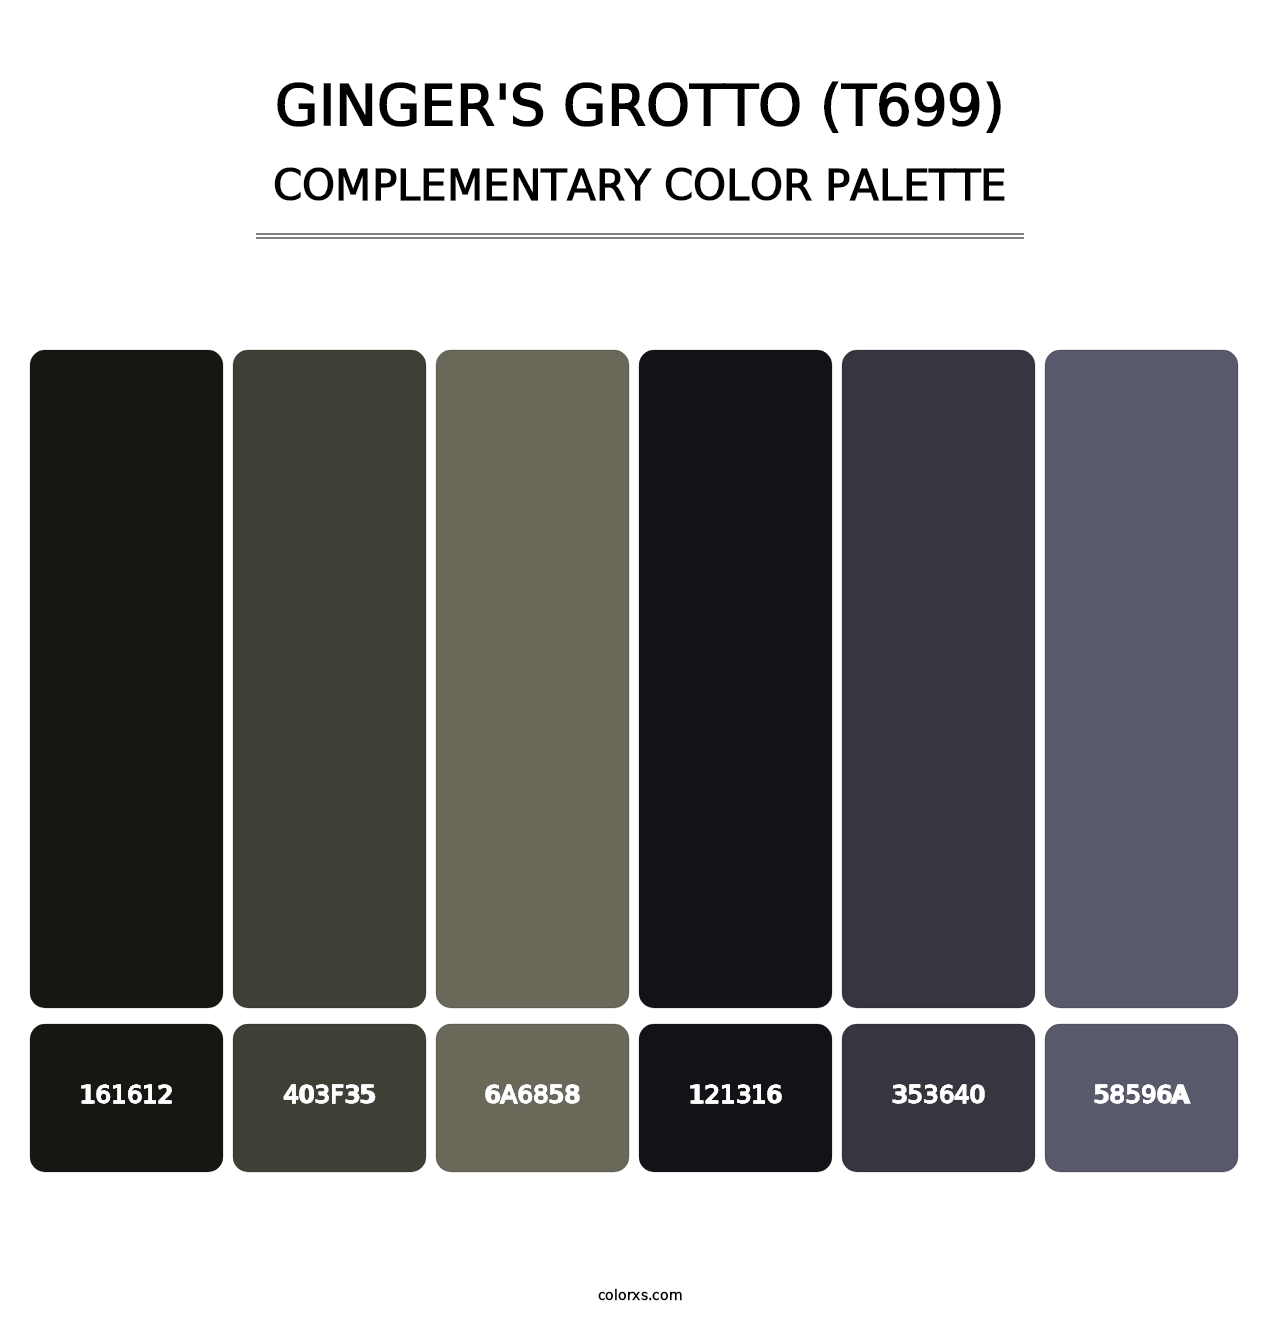 Ginger's Grotto (T699) - Complementary Color Palette